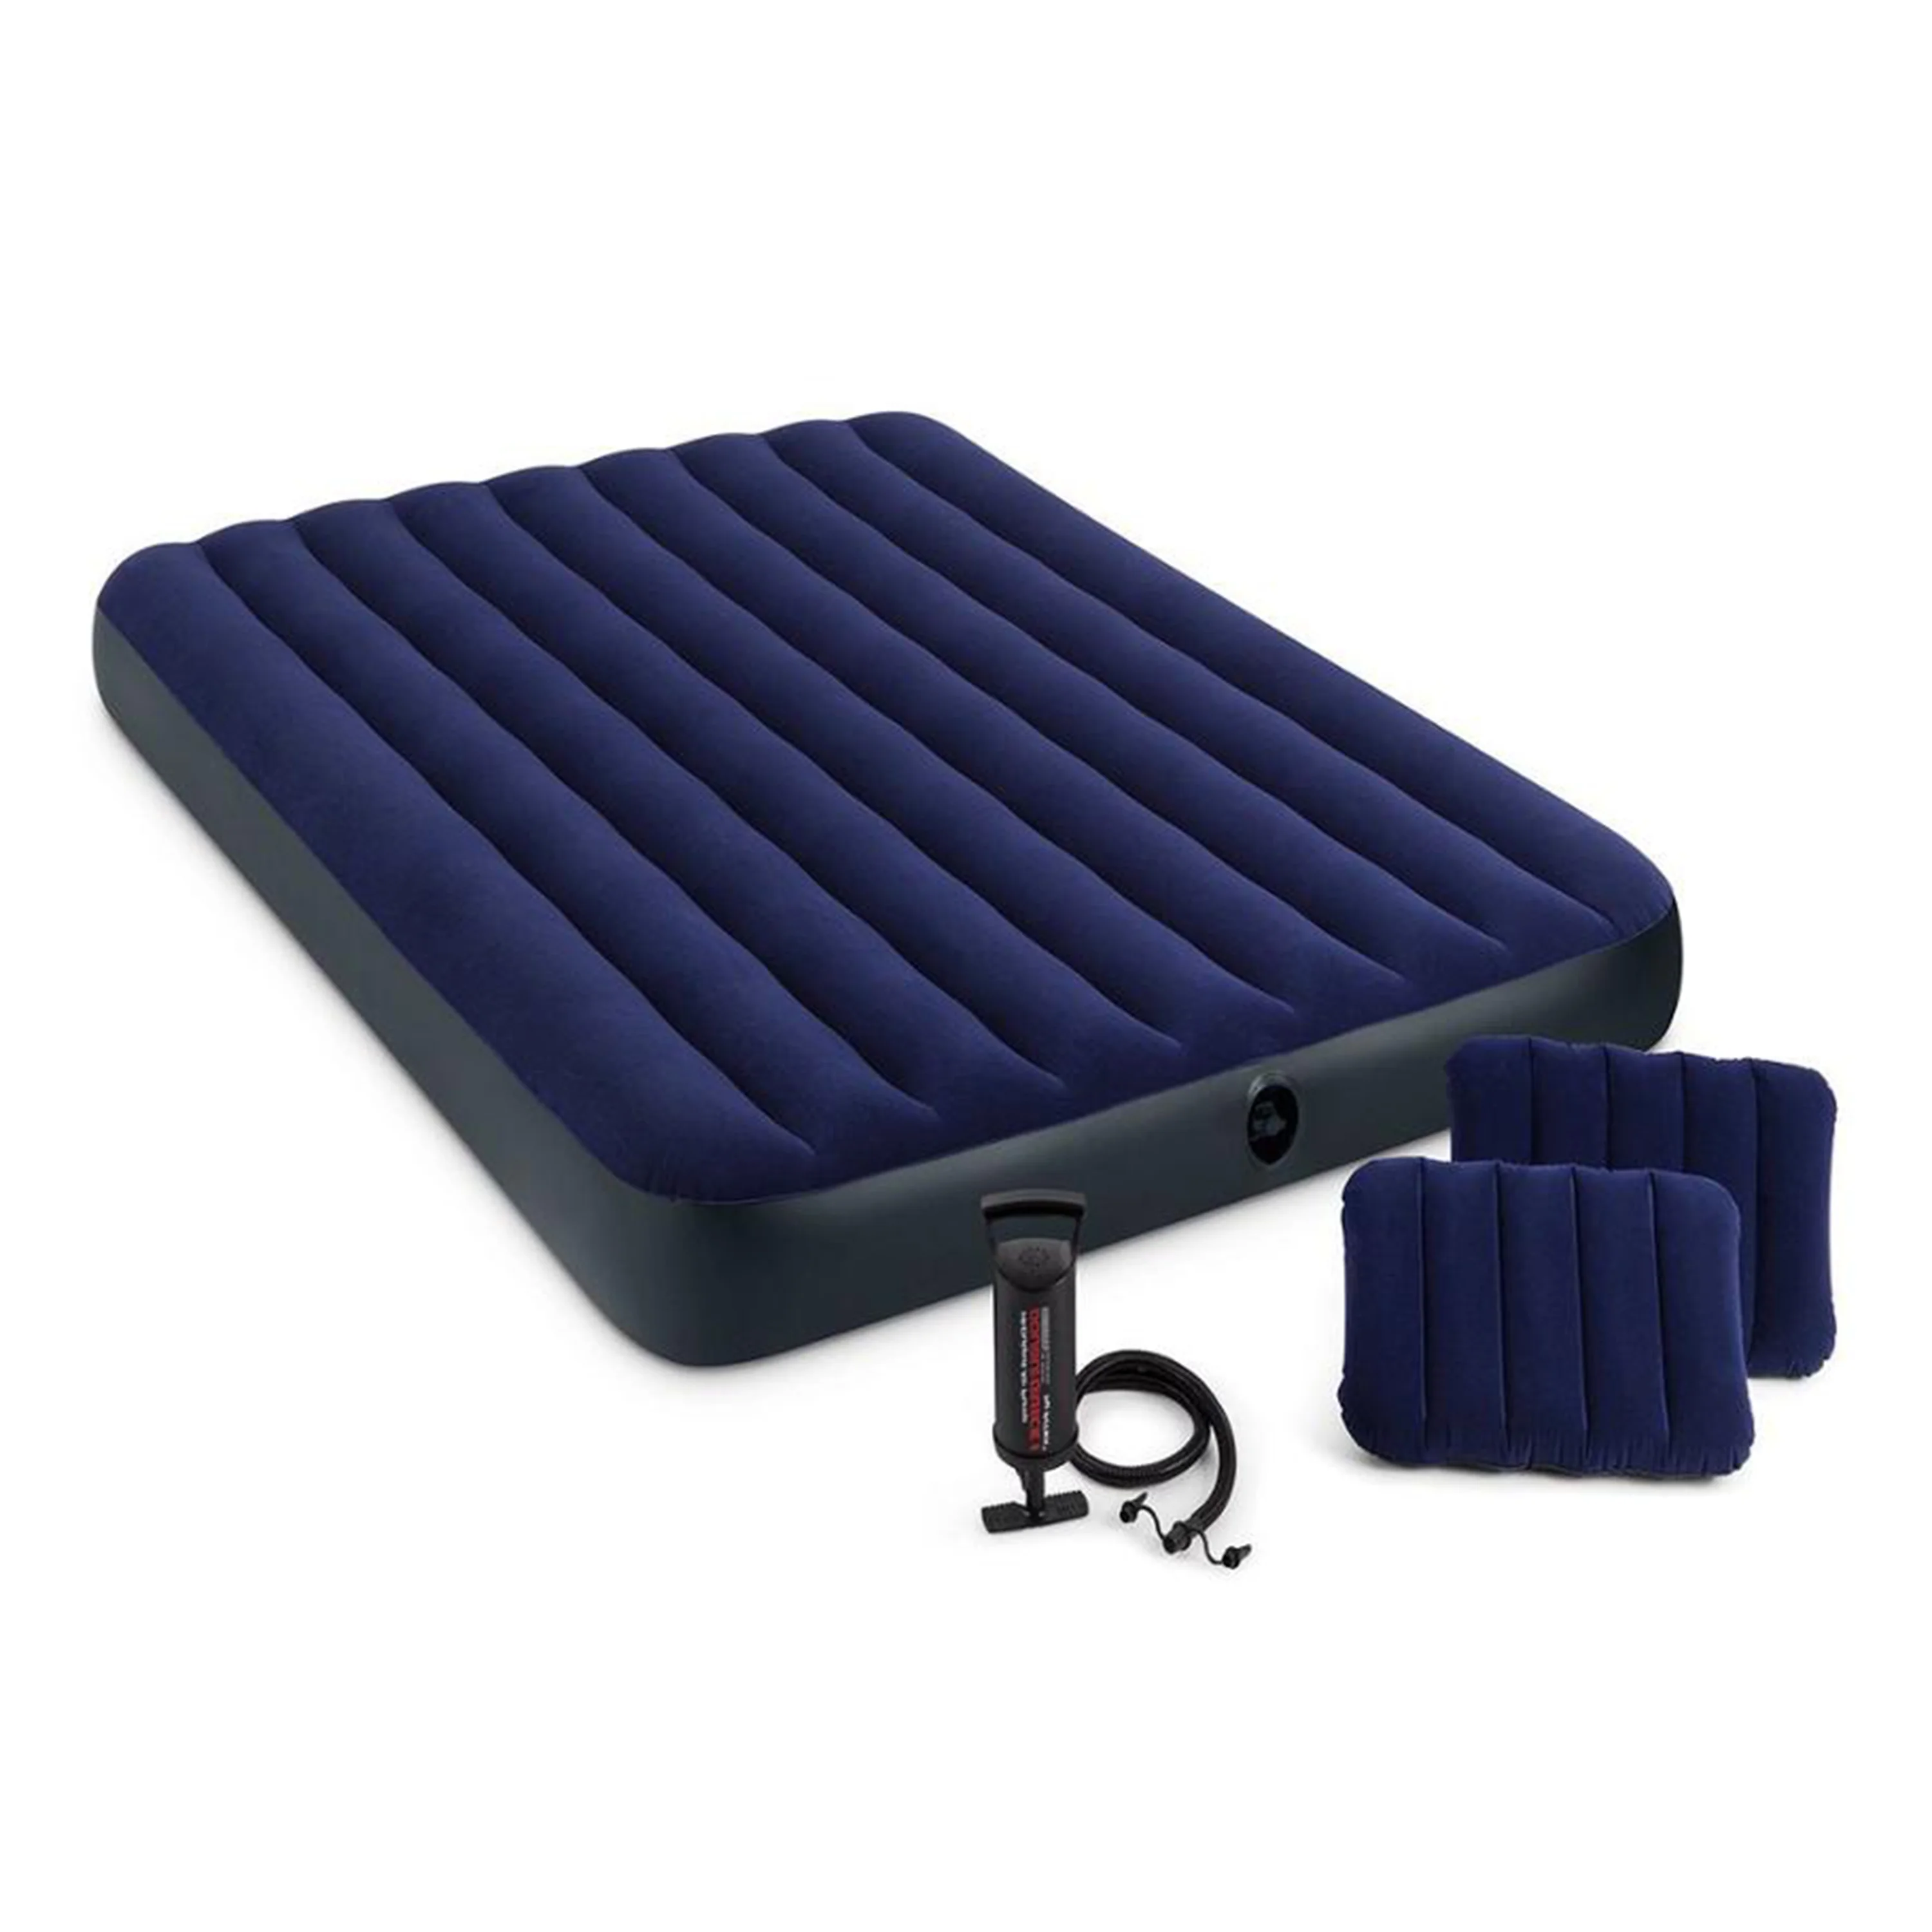 

INTEX 64765 Classic Inflatable Air Bed Inflatable Mattress Luxury Striped Flocking Air Cushion